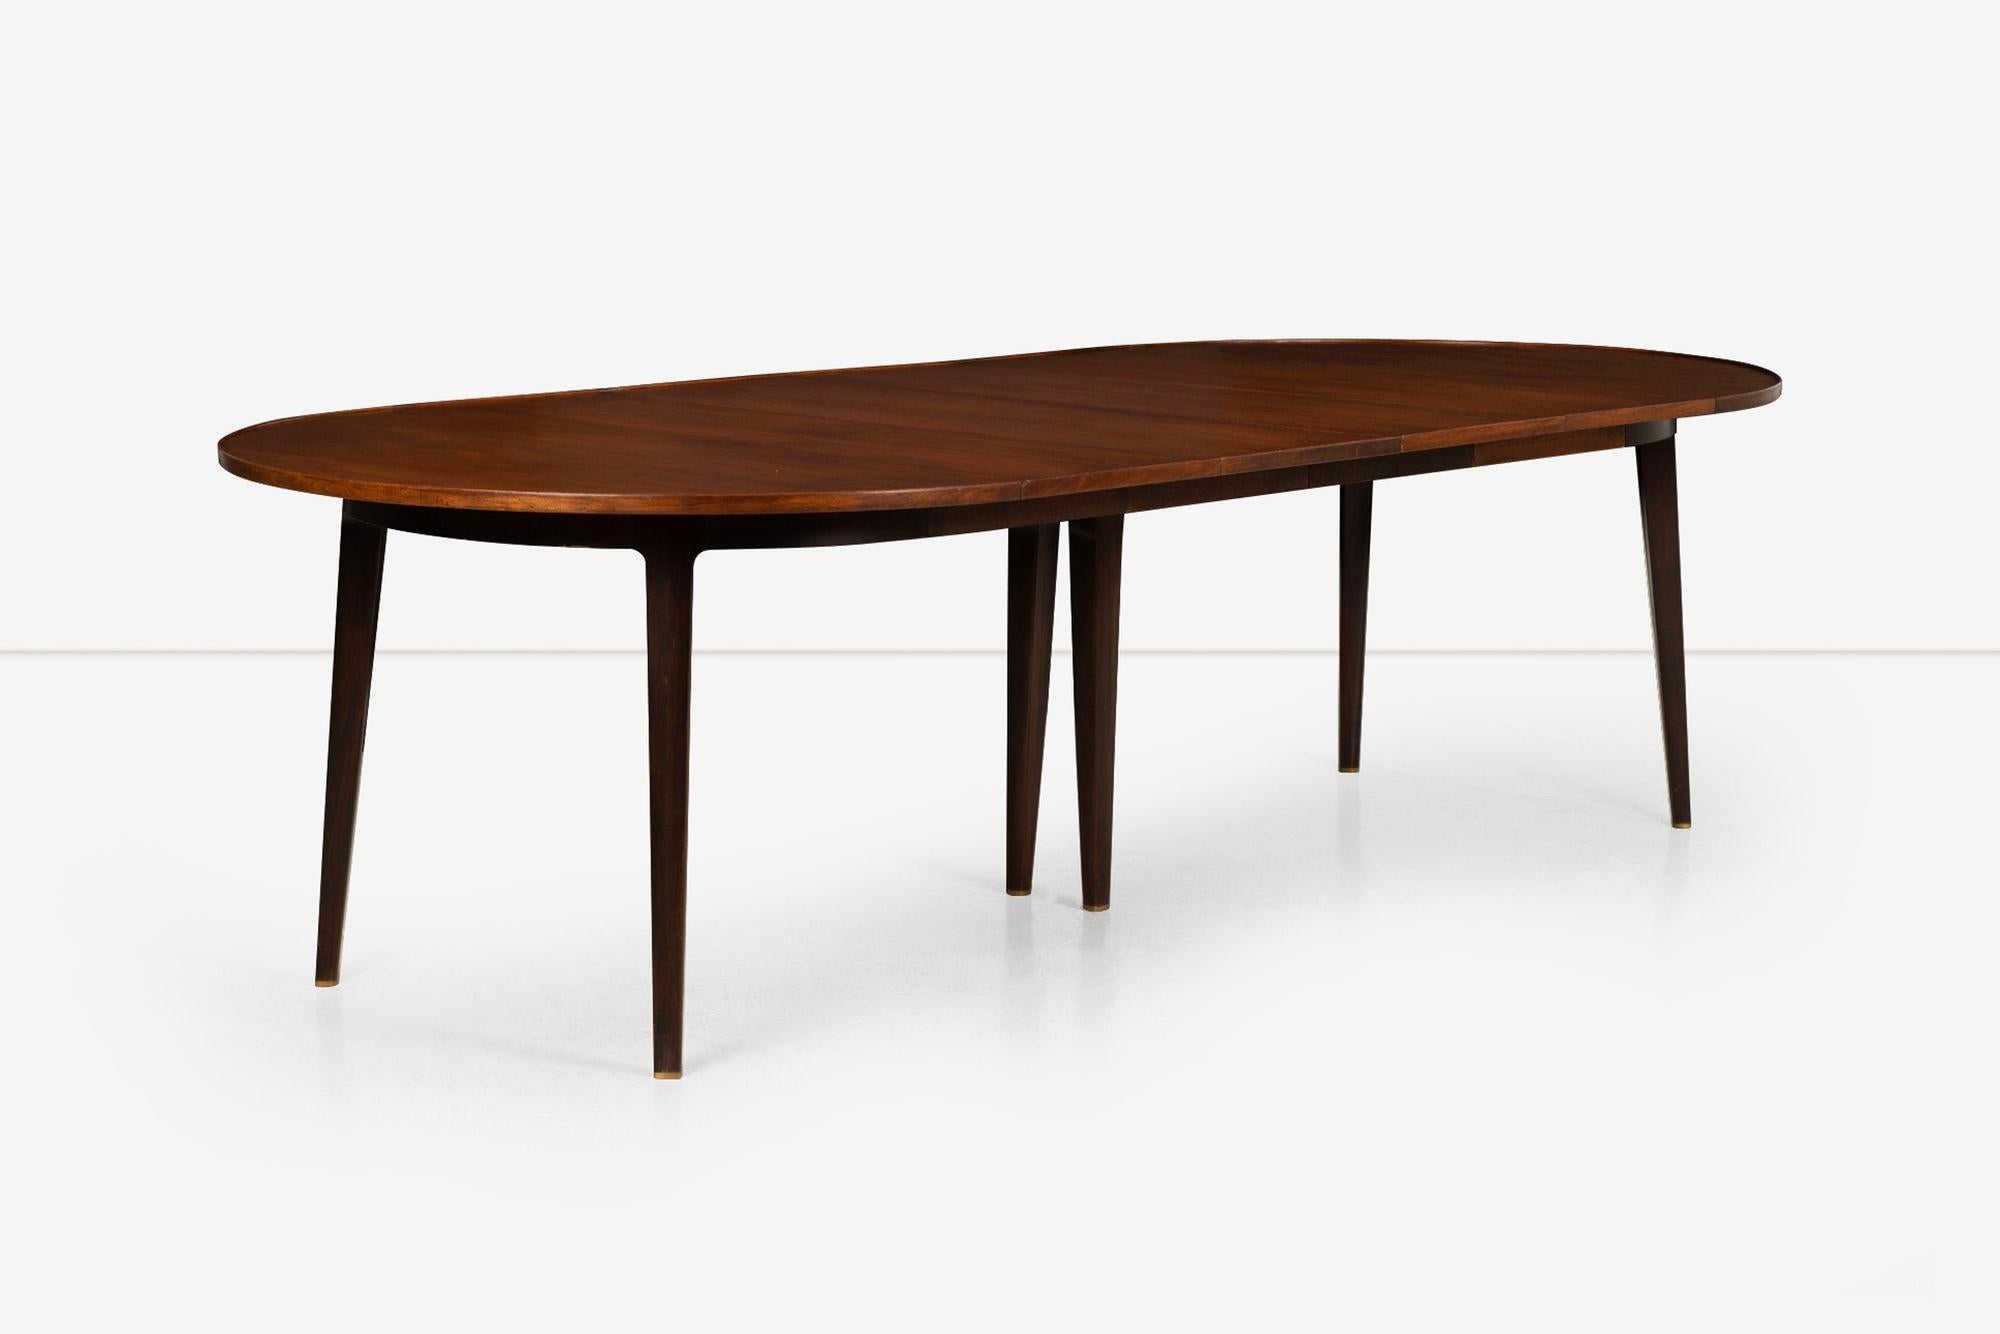 Edward Wormley for Dunbar Extension Dining Table. One-inch thick top with edge banding and a slight upward reveal or lip design detail shown in pictures. The table is 48